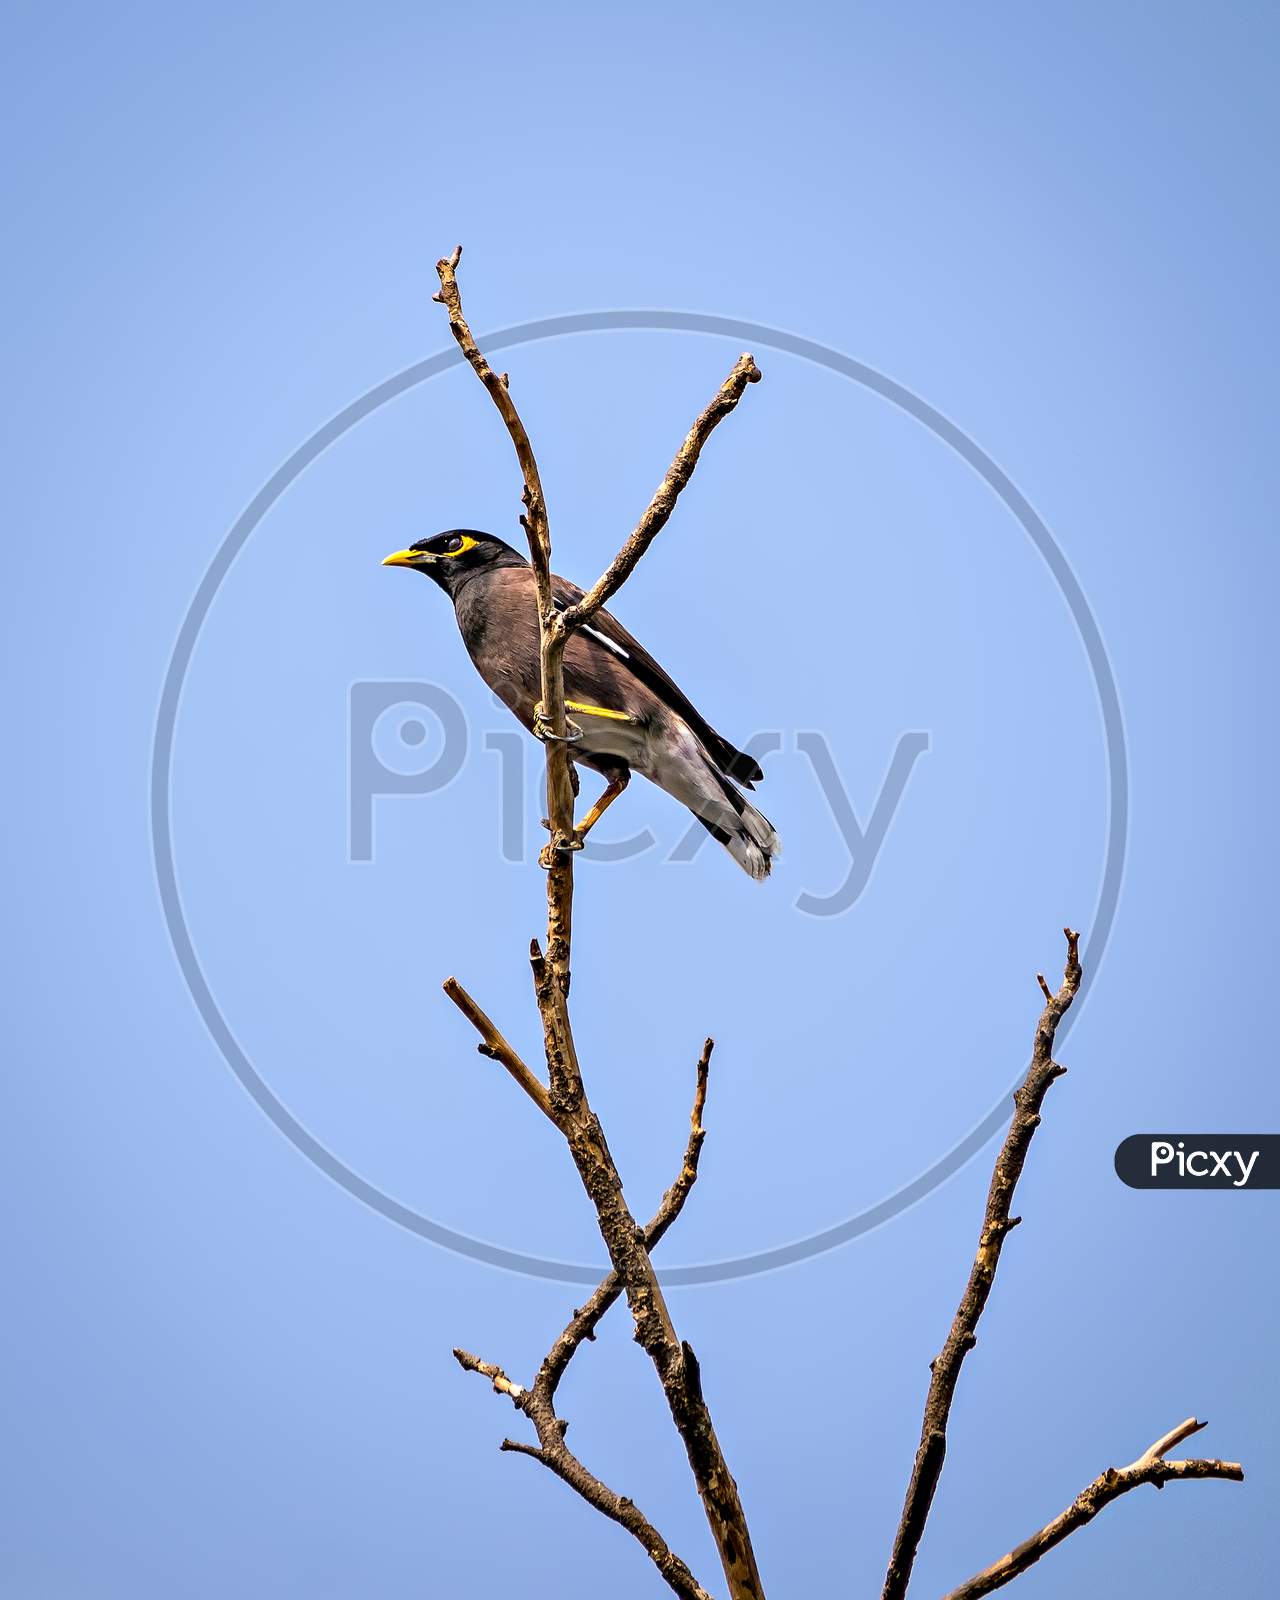 Common Myna Bird Sitting On A Dry Tree Branch With Clear Blue Sky Background.